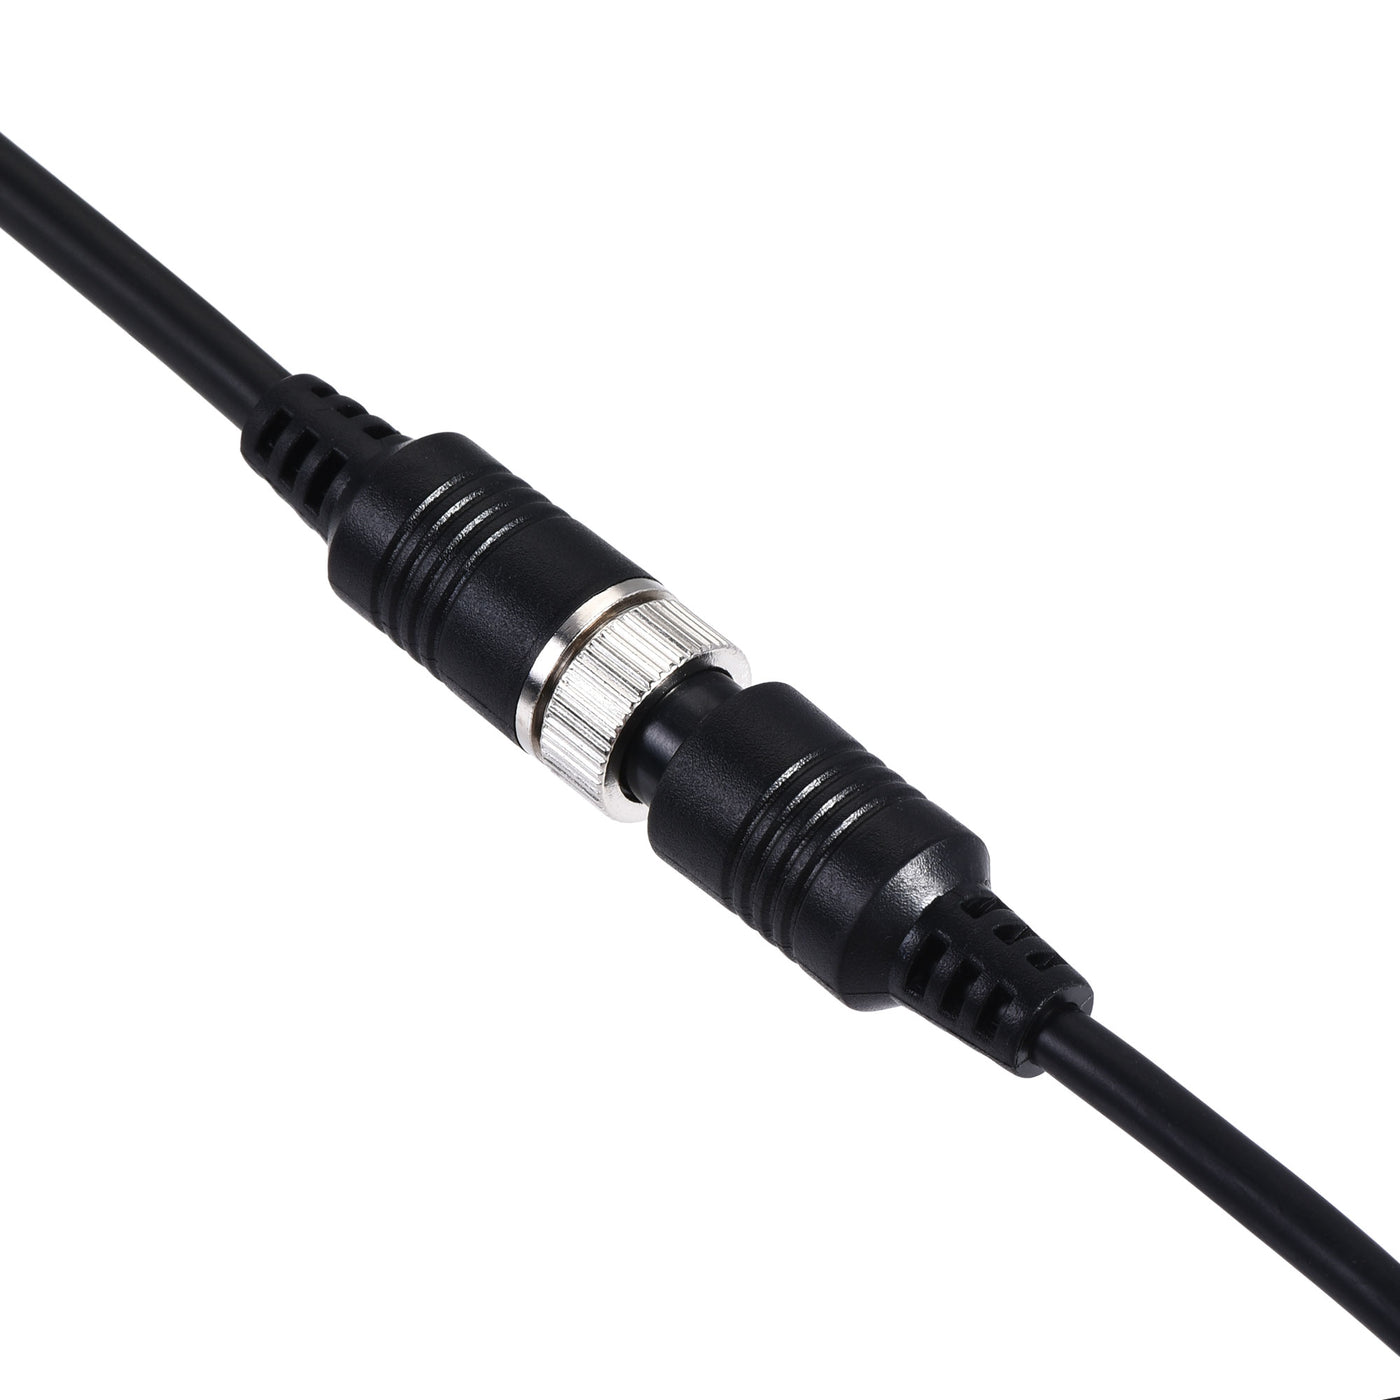 Uxcell Uxcell Video Aviation Cable 4-Pin 49.21FT 15 Meters Male to Female Extension Cable